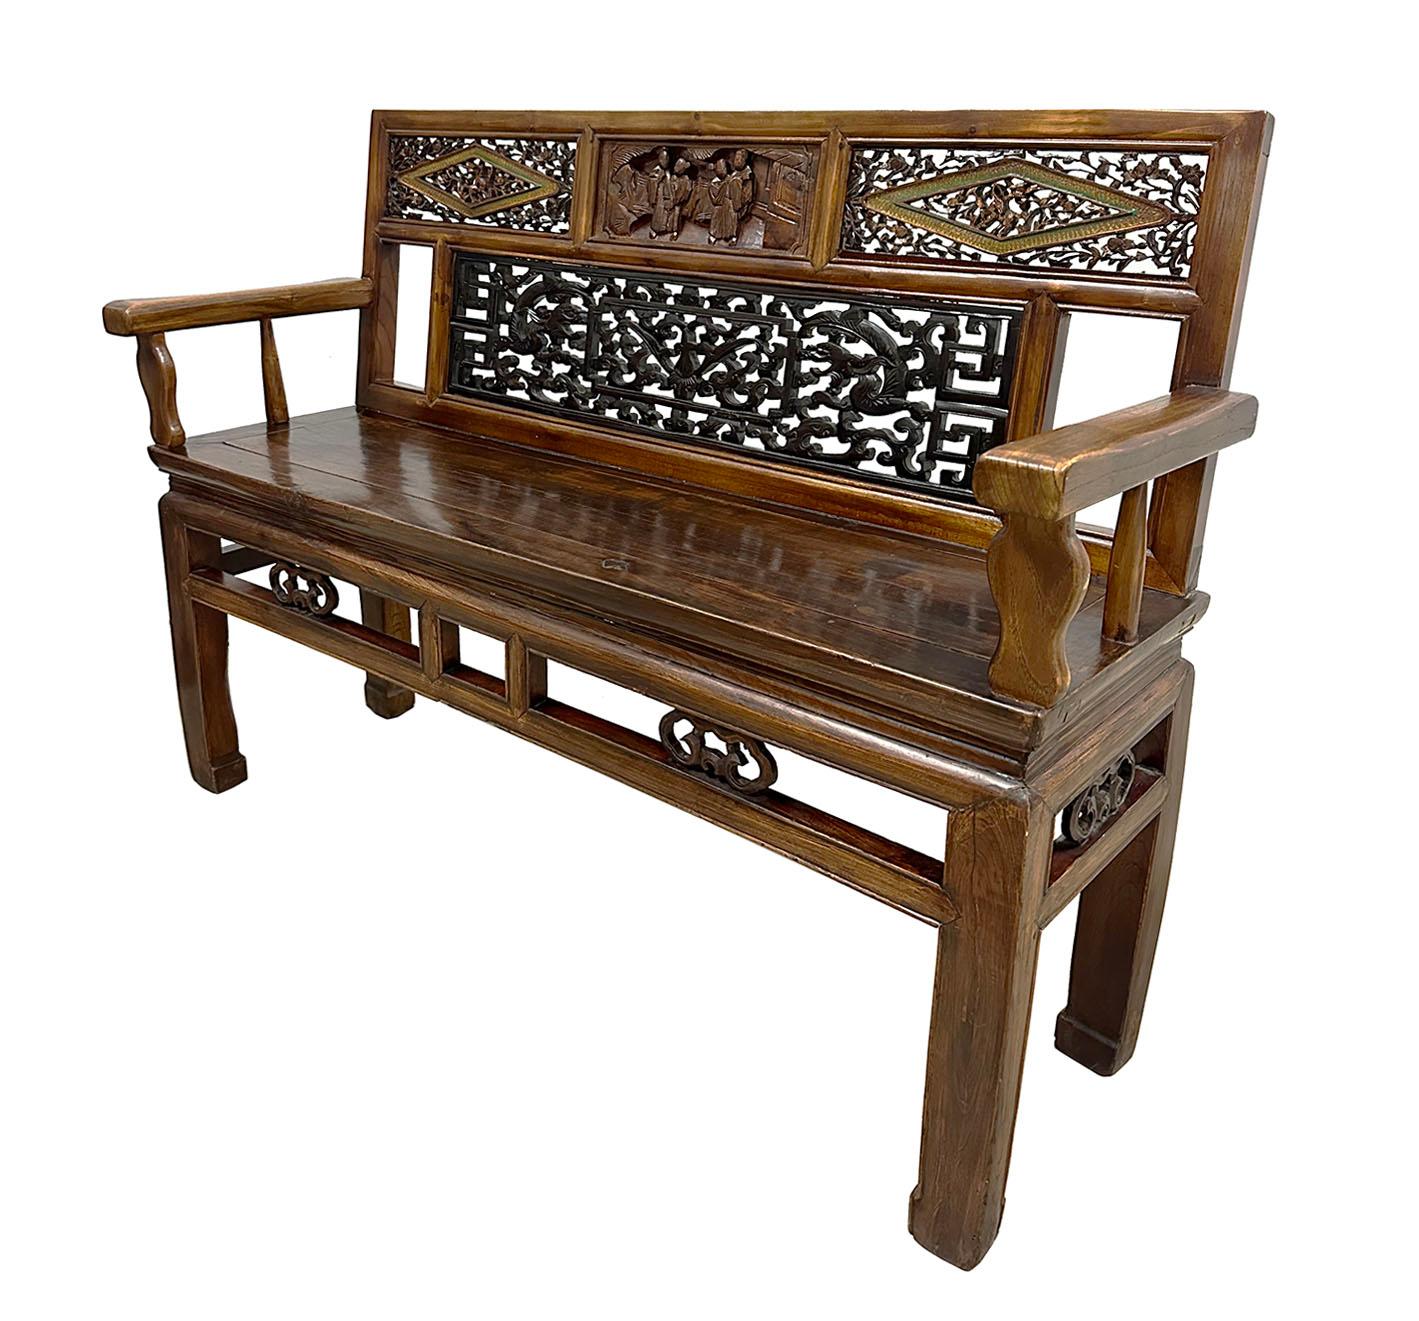 This beautiful Chinese antique bench is made from solid wood with lot of intricate Chinese traditional carving design on the  backrest. It has Chinese traditional carving works of Chinese Opera and Dragon clouds on the back.  This bench itself has